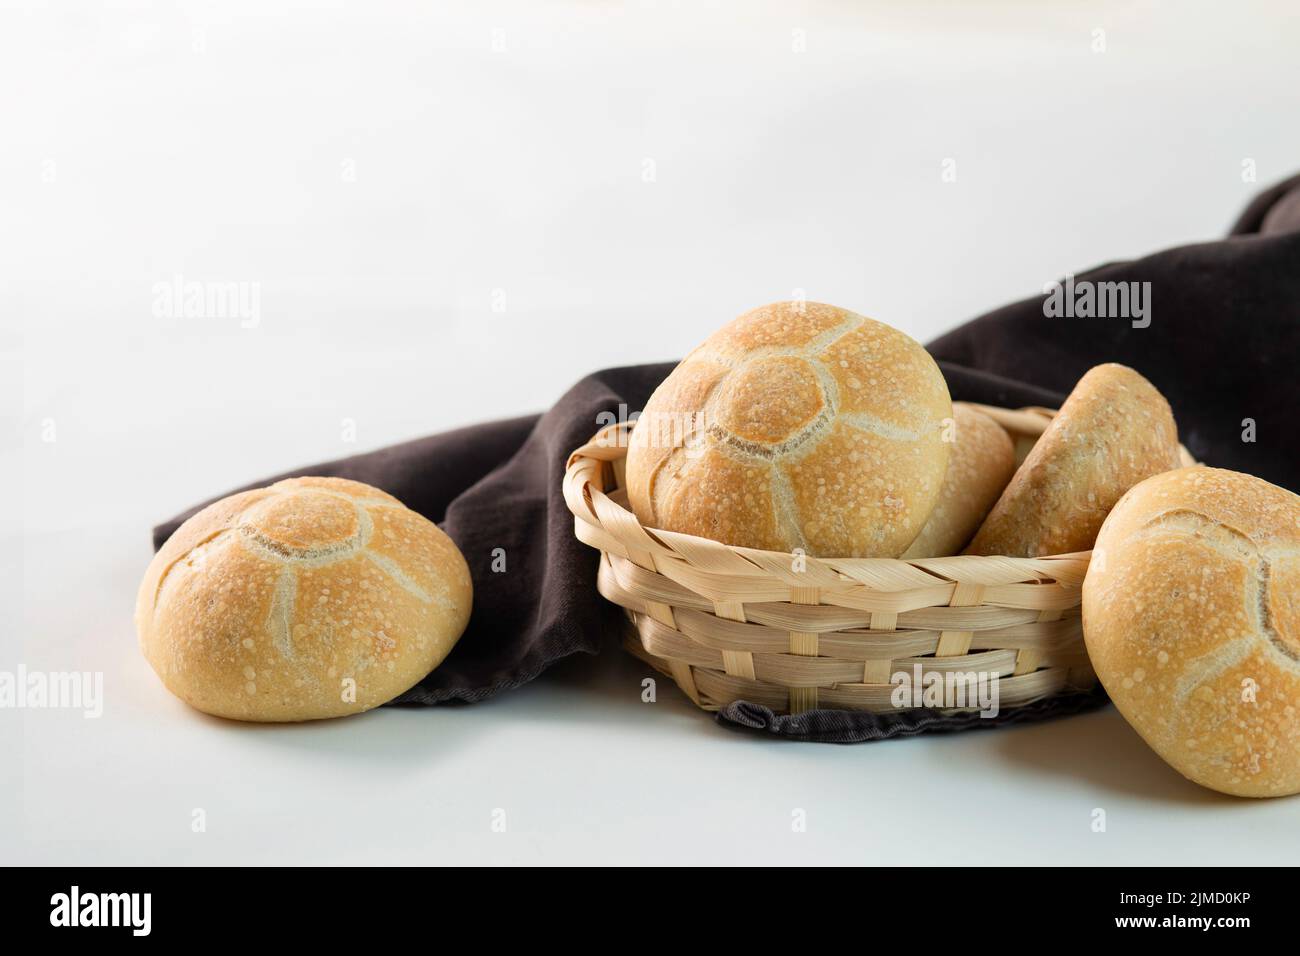 Delicious freshly baked buns placed in wicker bowl near brown fabric against white background Stock Photo